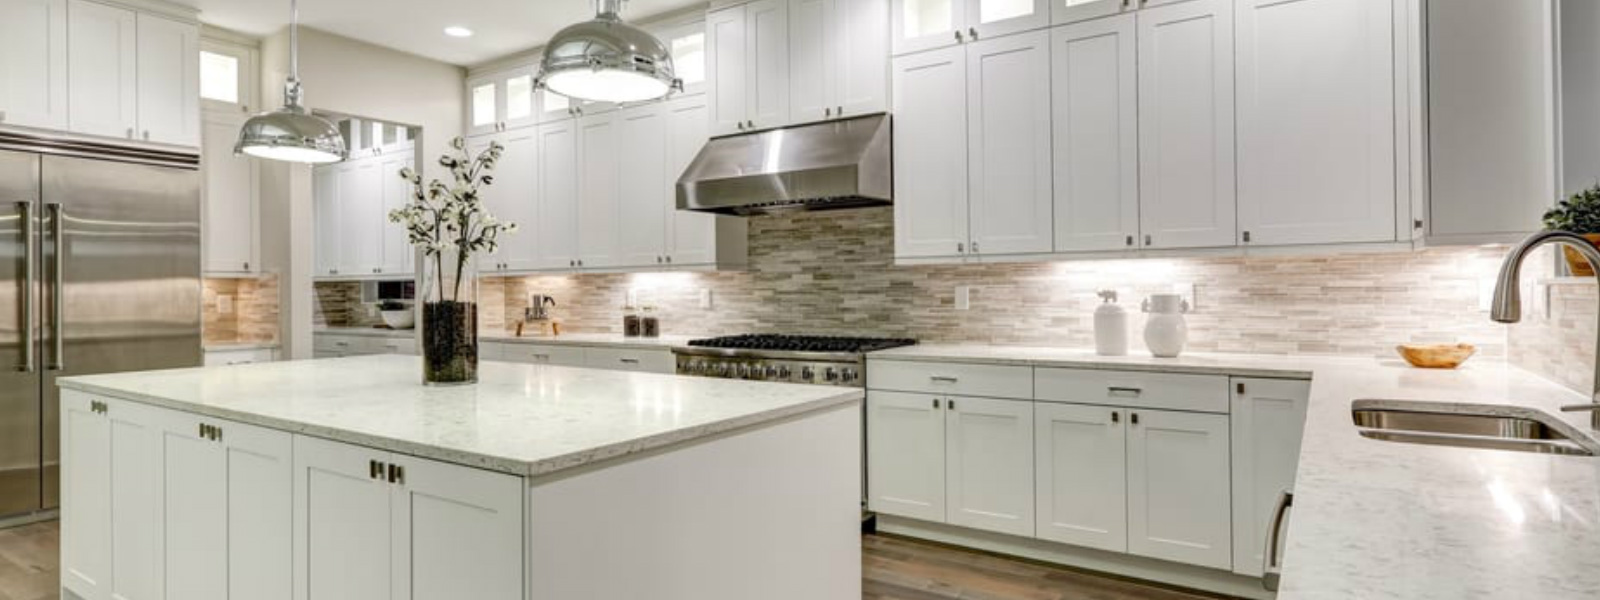 Kitchen Remodel Ideas That Pay Off